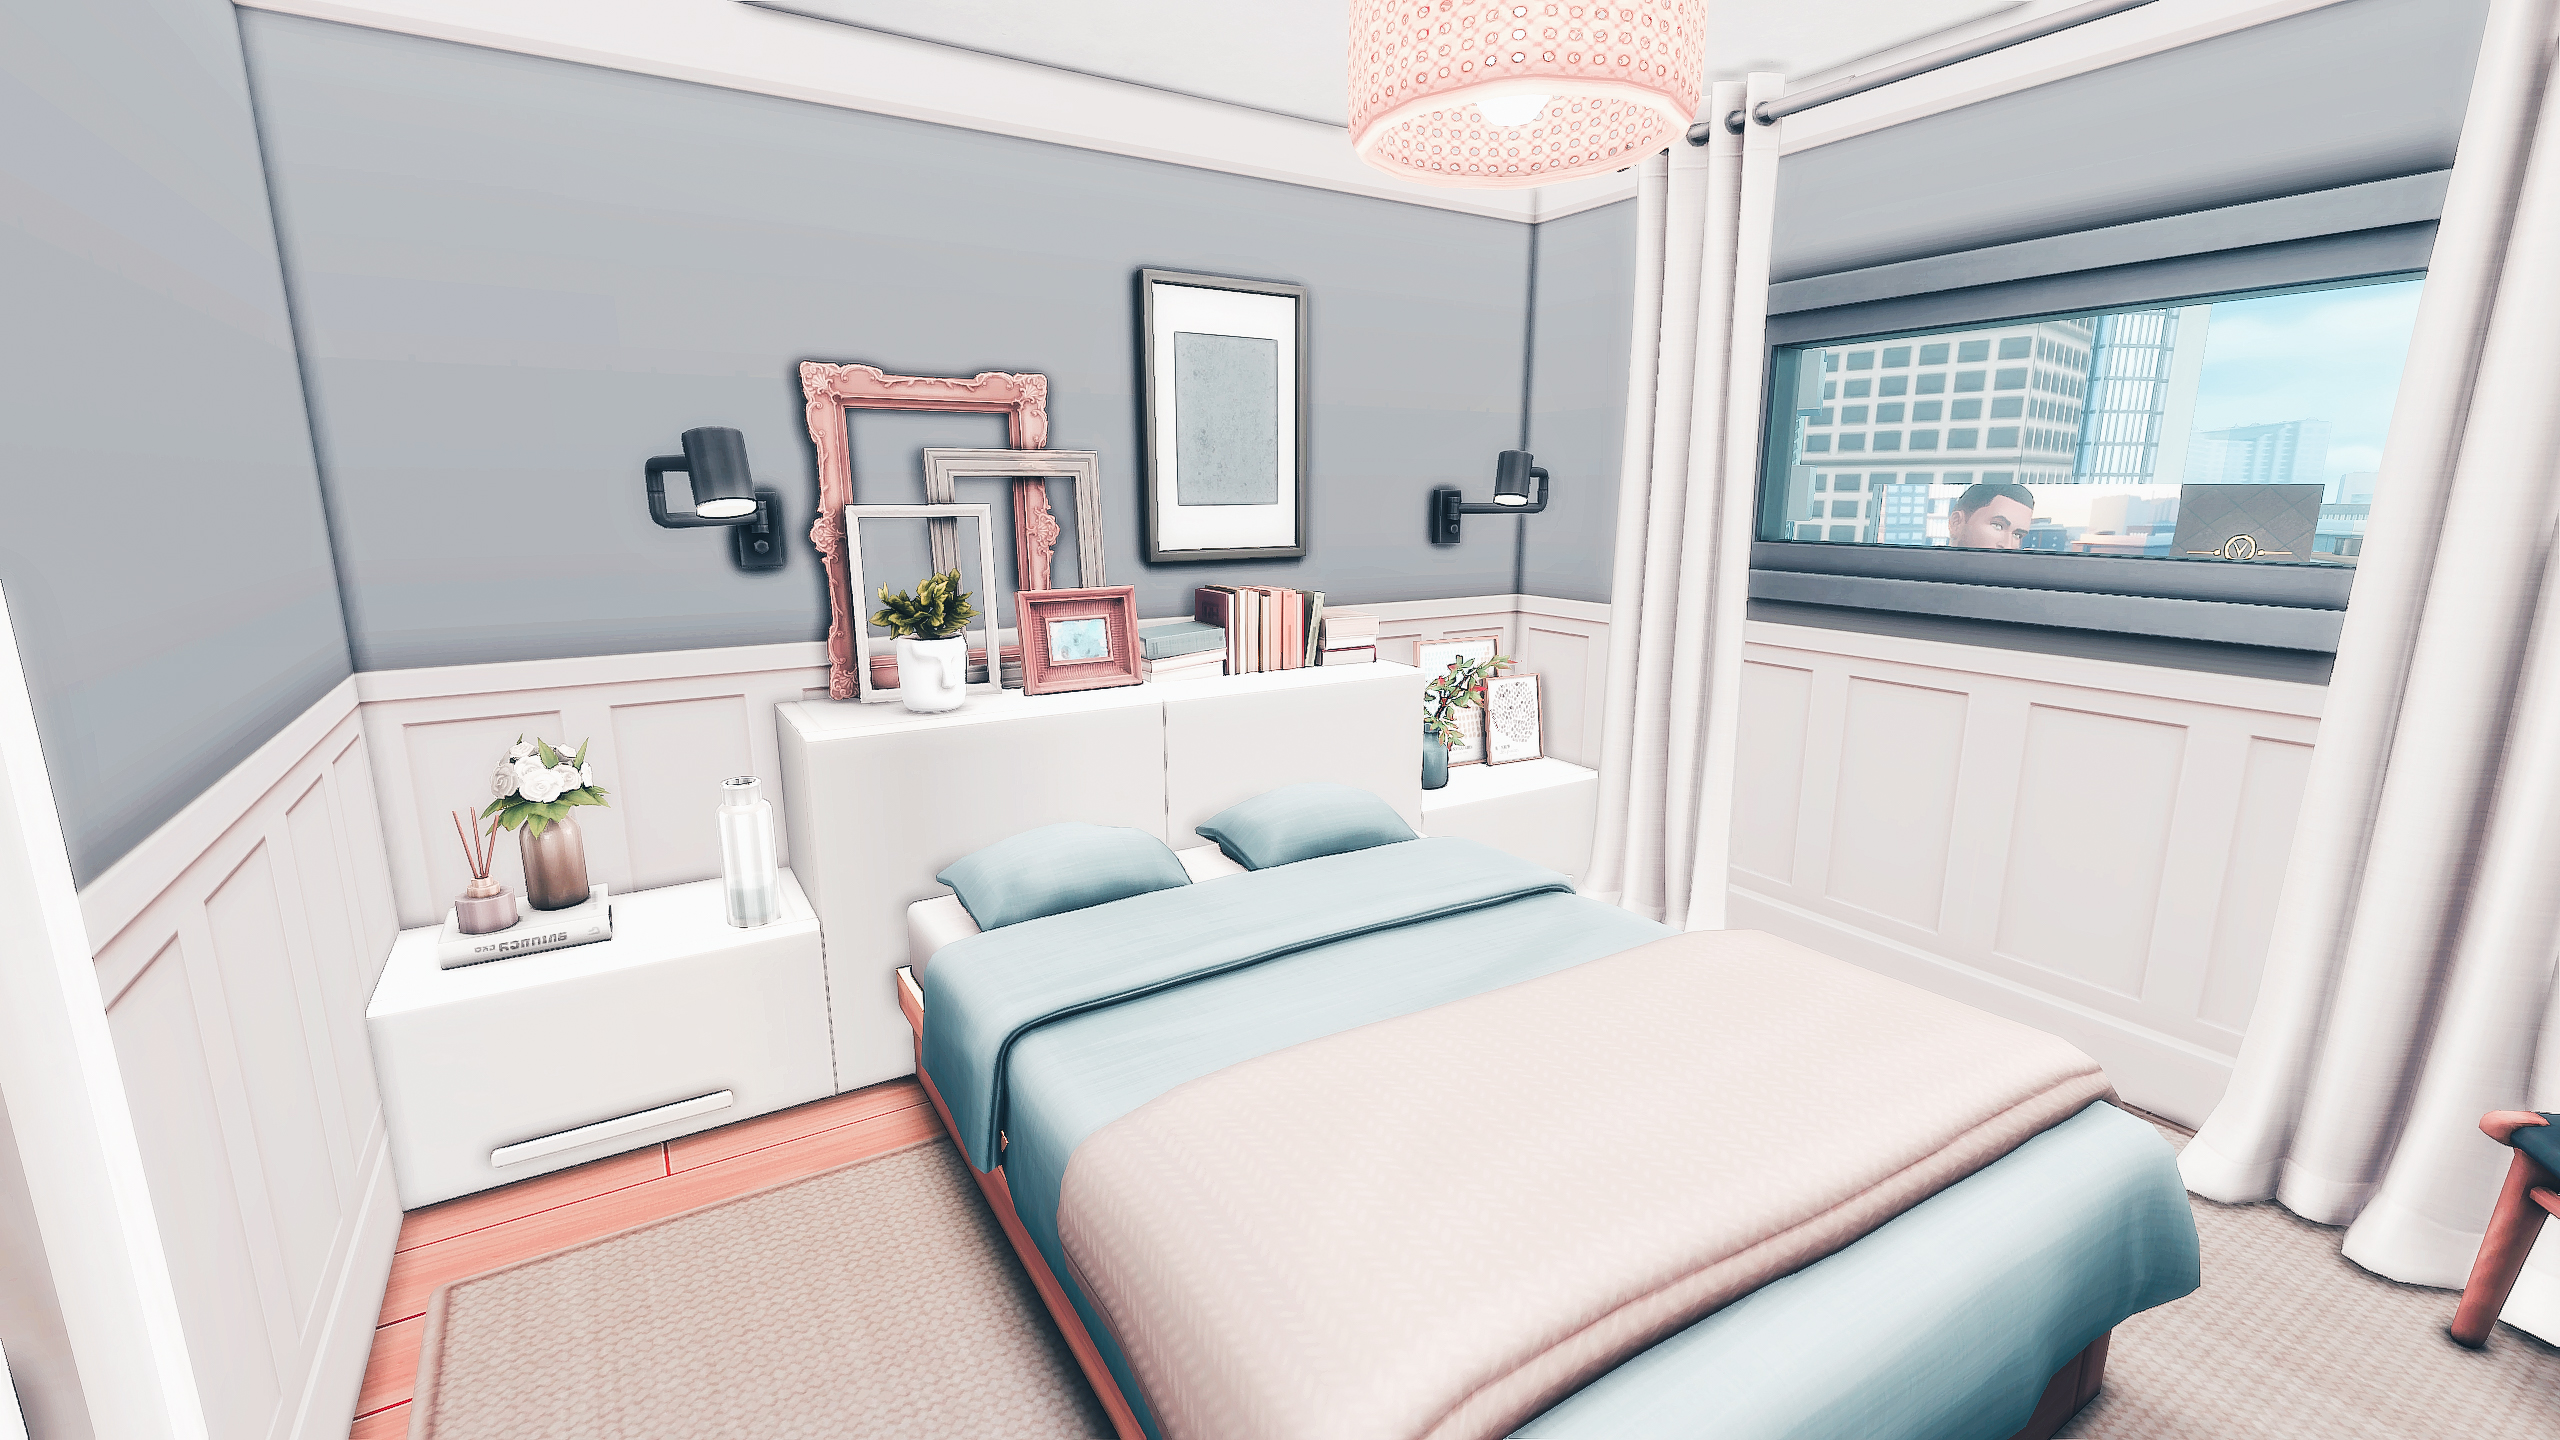 Couples First Apartment - The Sims 4 Rooms / Lots - CurseForge